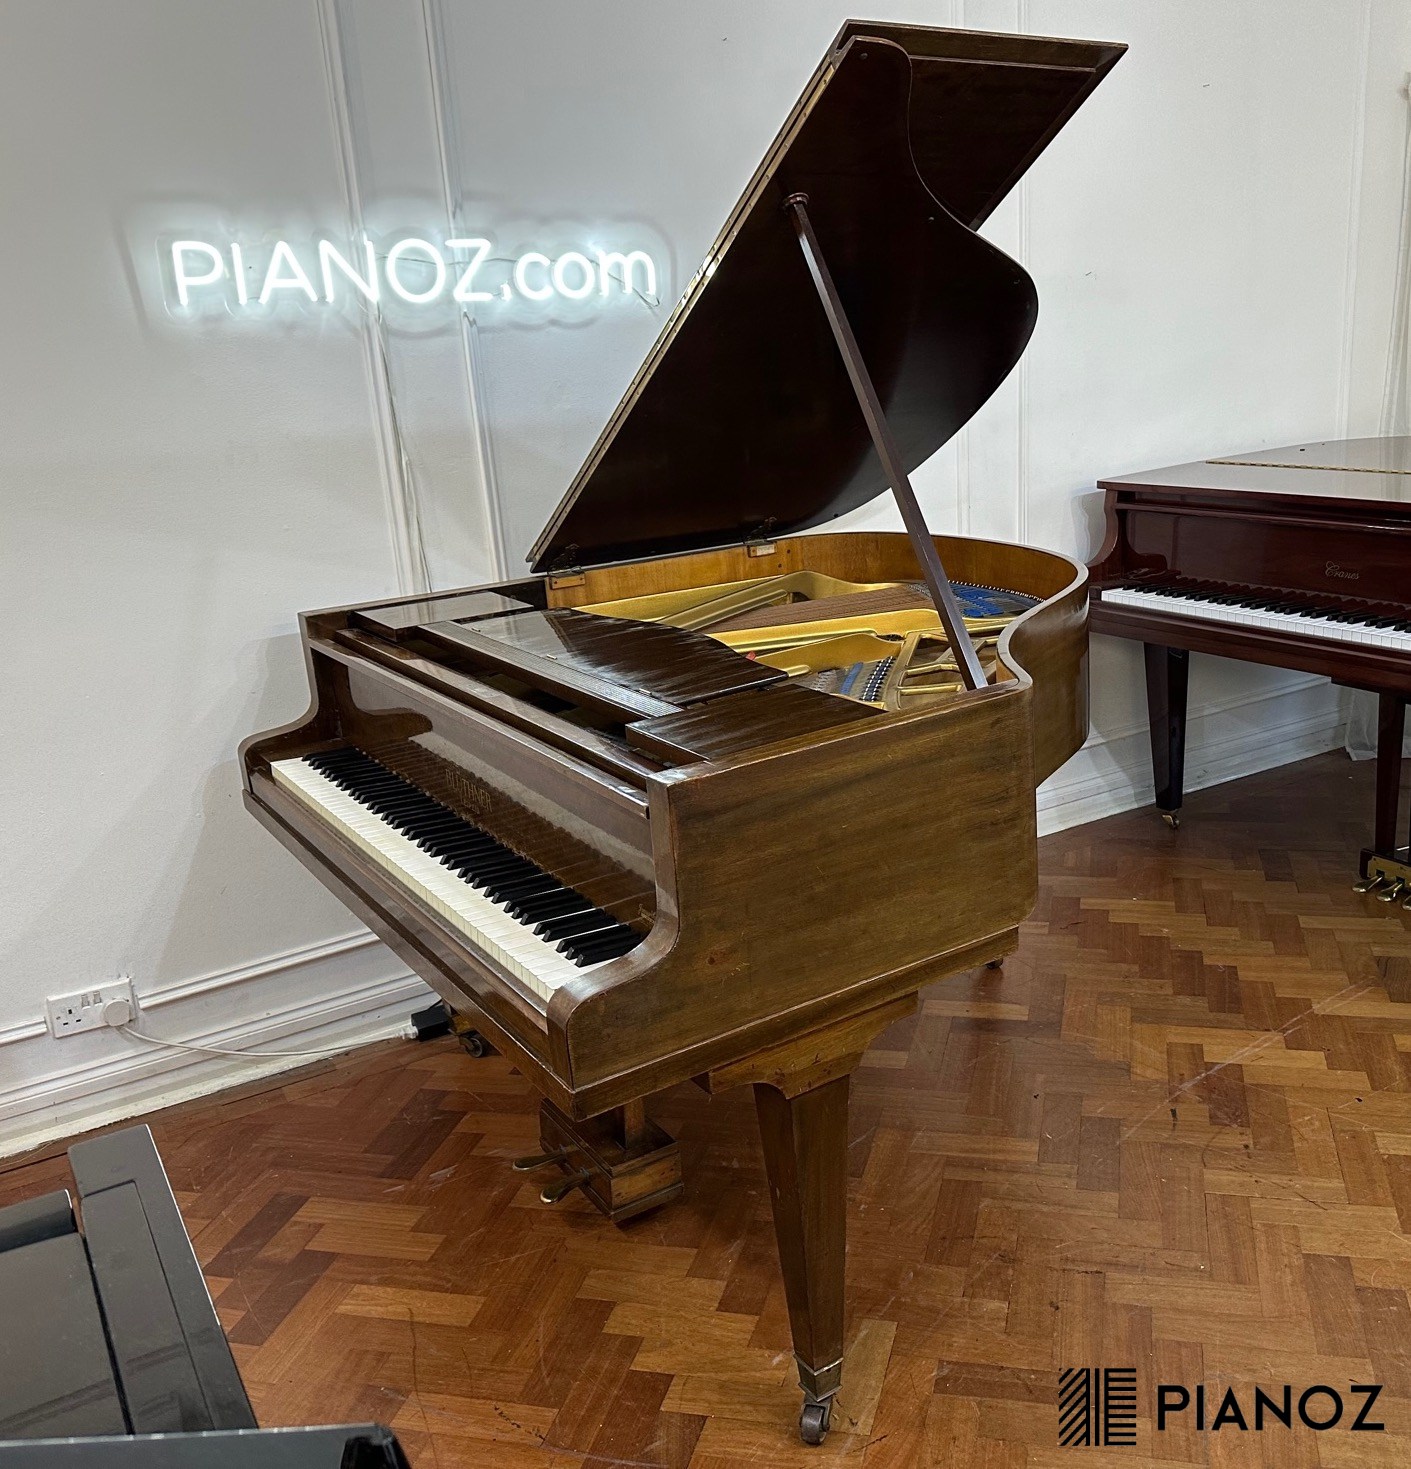 Bluthner Style 4 Baby Grand Piano piano for sale in UK